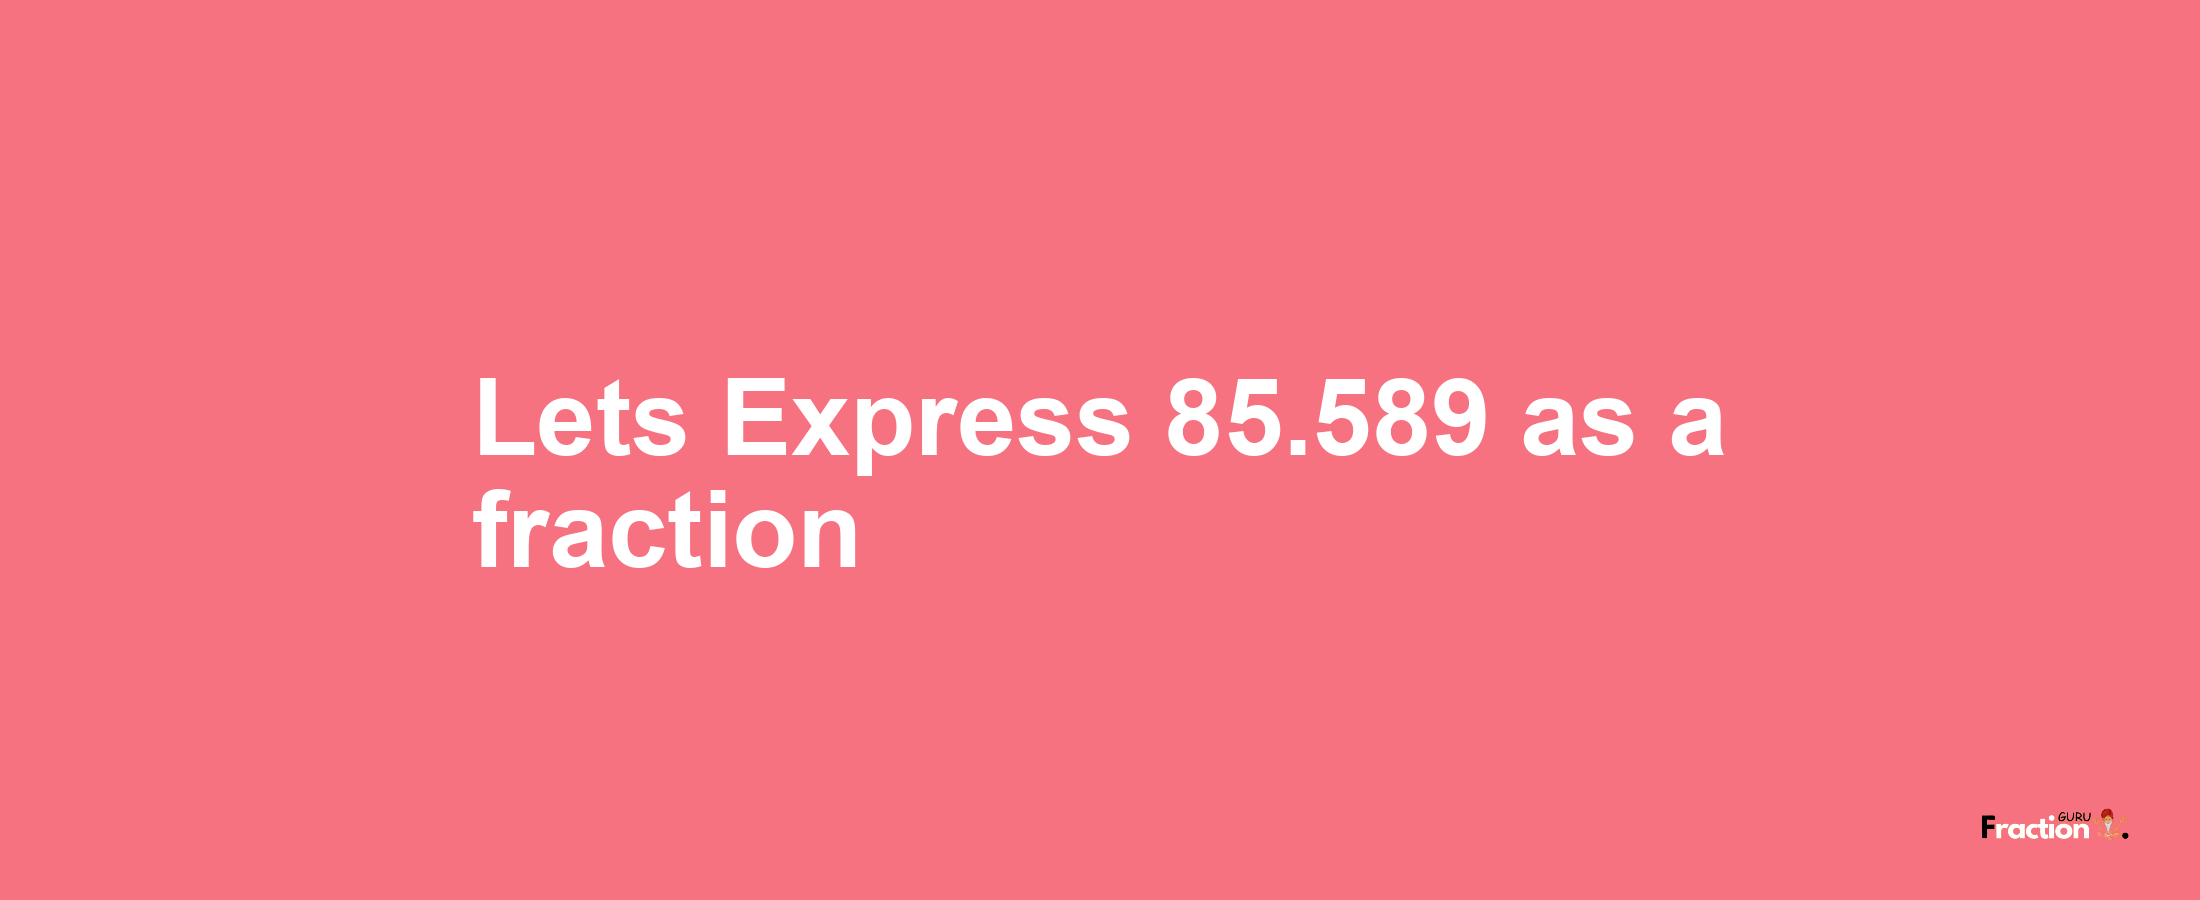 Lets Express 85.589 as afraction